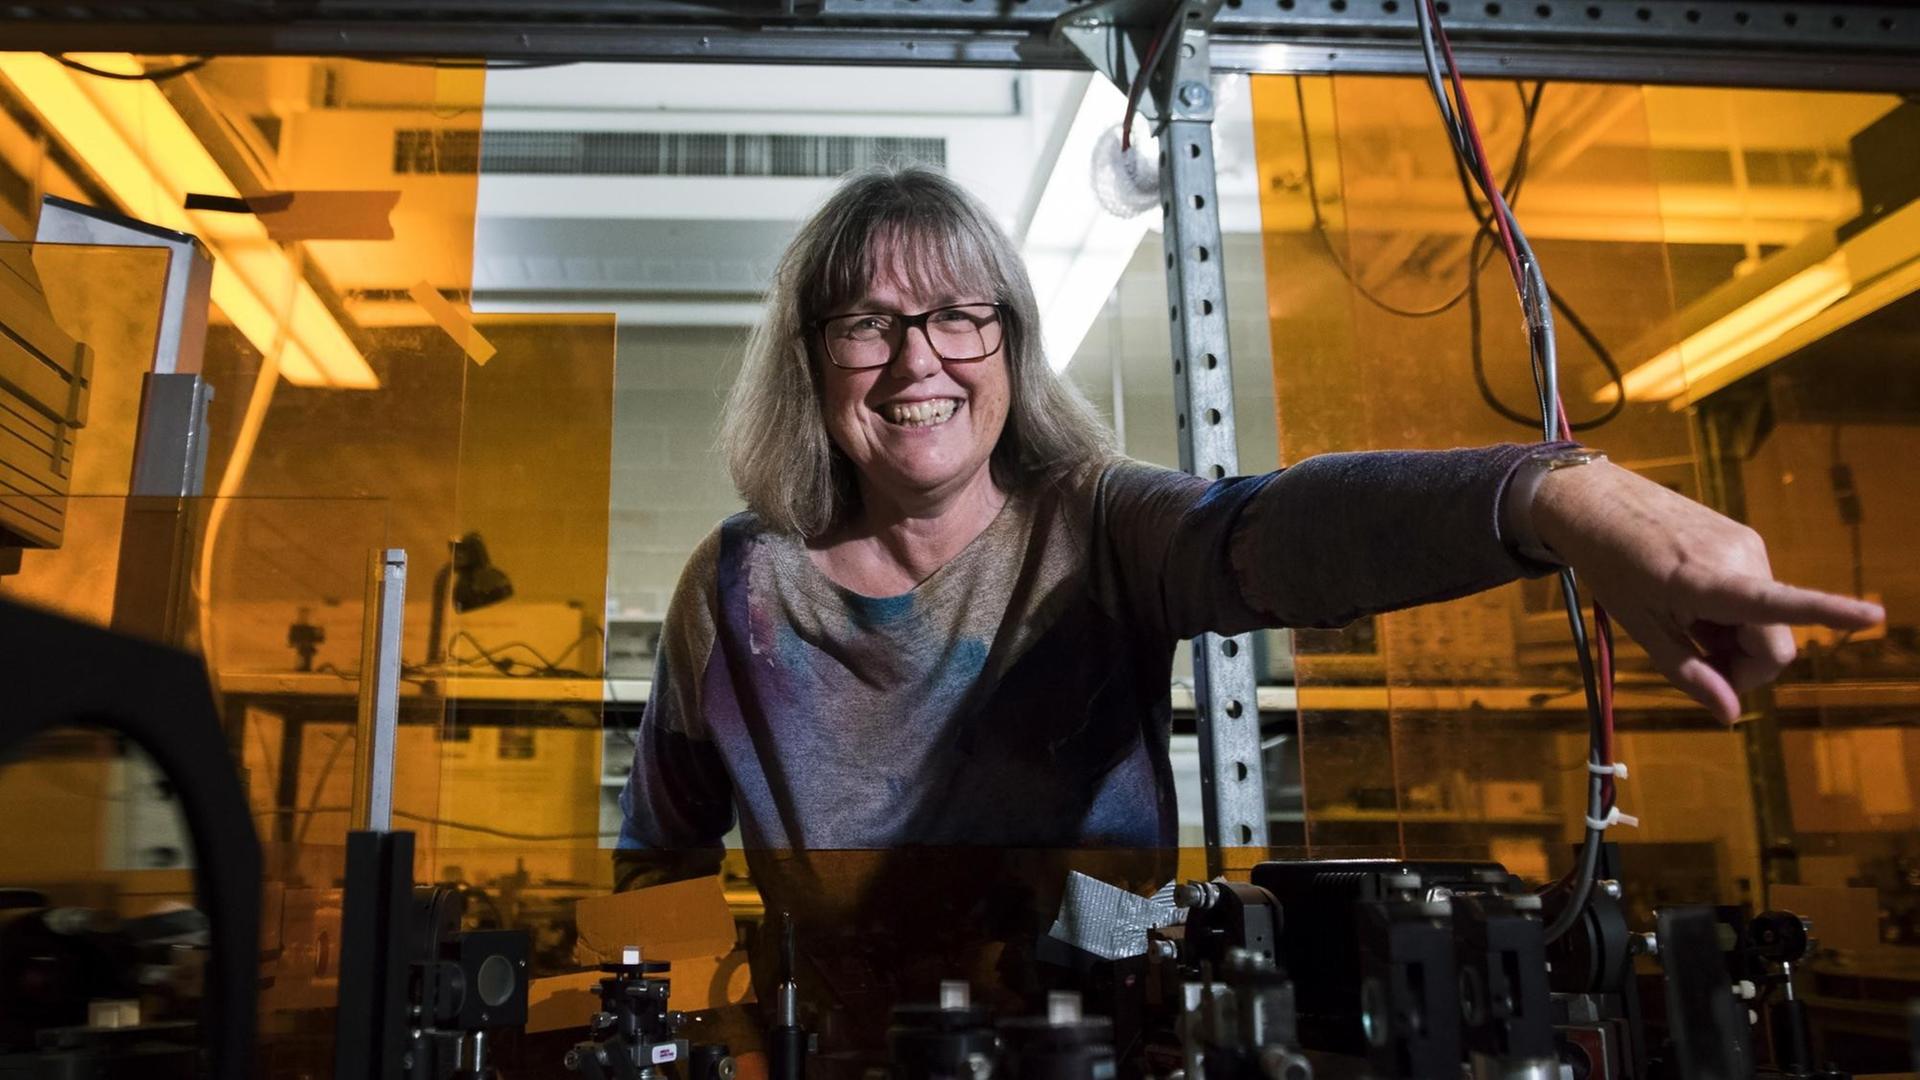 Nobel Prize winner Donna Strickland shows the media her lab after speaking about her prestigious award in Waterloo, Ont., on Tuesday, Oct. 2, 2018. Strickland is among three physicists who were awarded the prize earlier today for groundbreaking inventions in the field of laser physics and also is one of only three women ever to win the Nobel Prize for physics, co-invented a method of generating high-intensity, ultra-short optical pulses which has a variety of applications, including corrective laser eye surgery. (Nathan Denette/The Canadian Press via AP) |